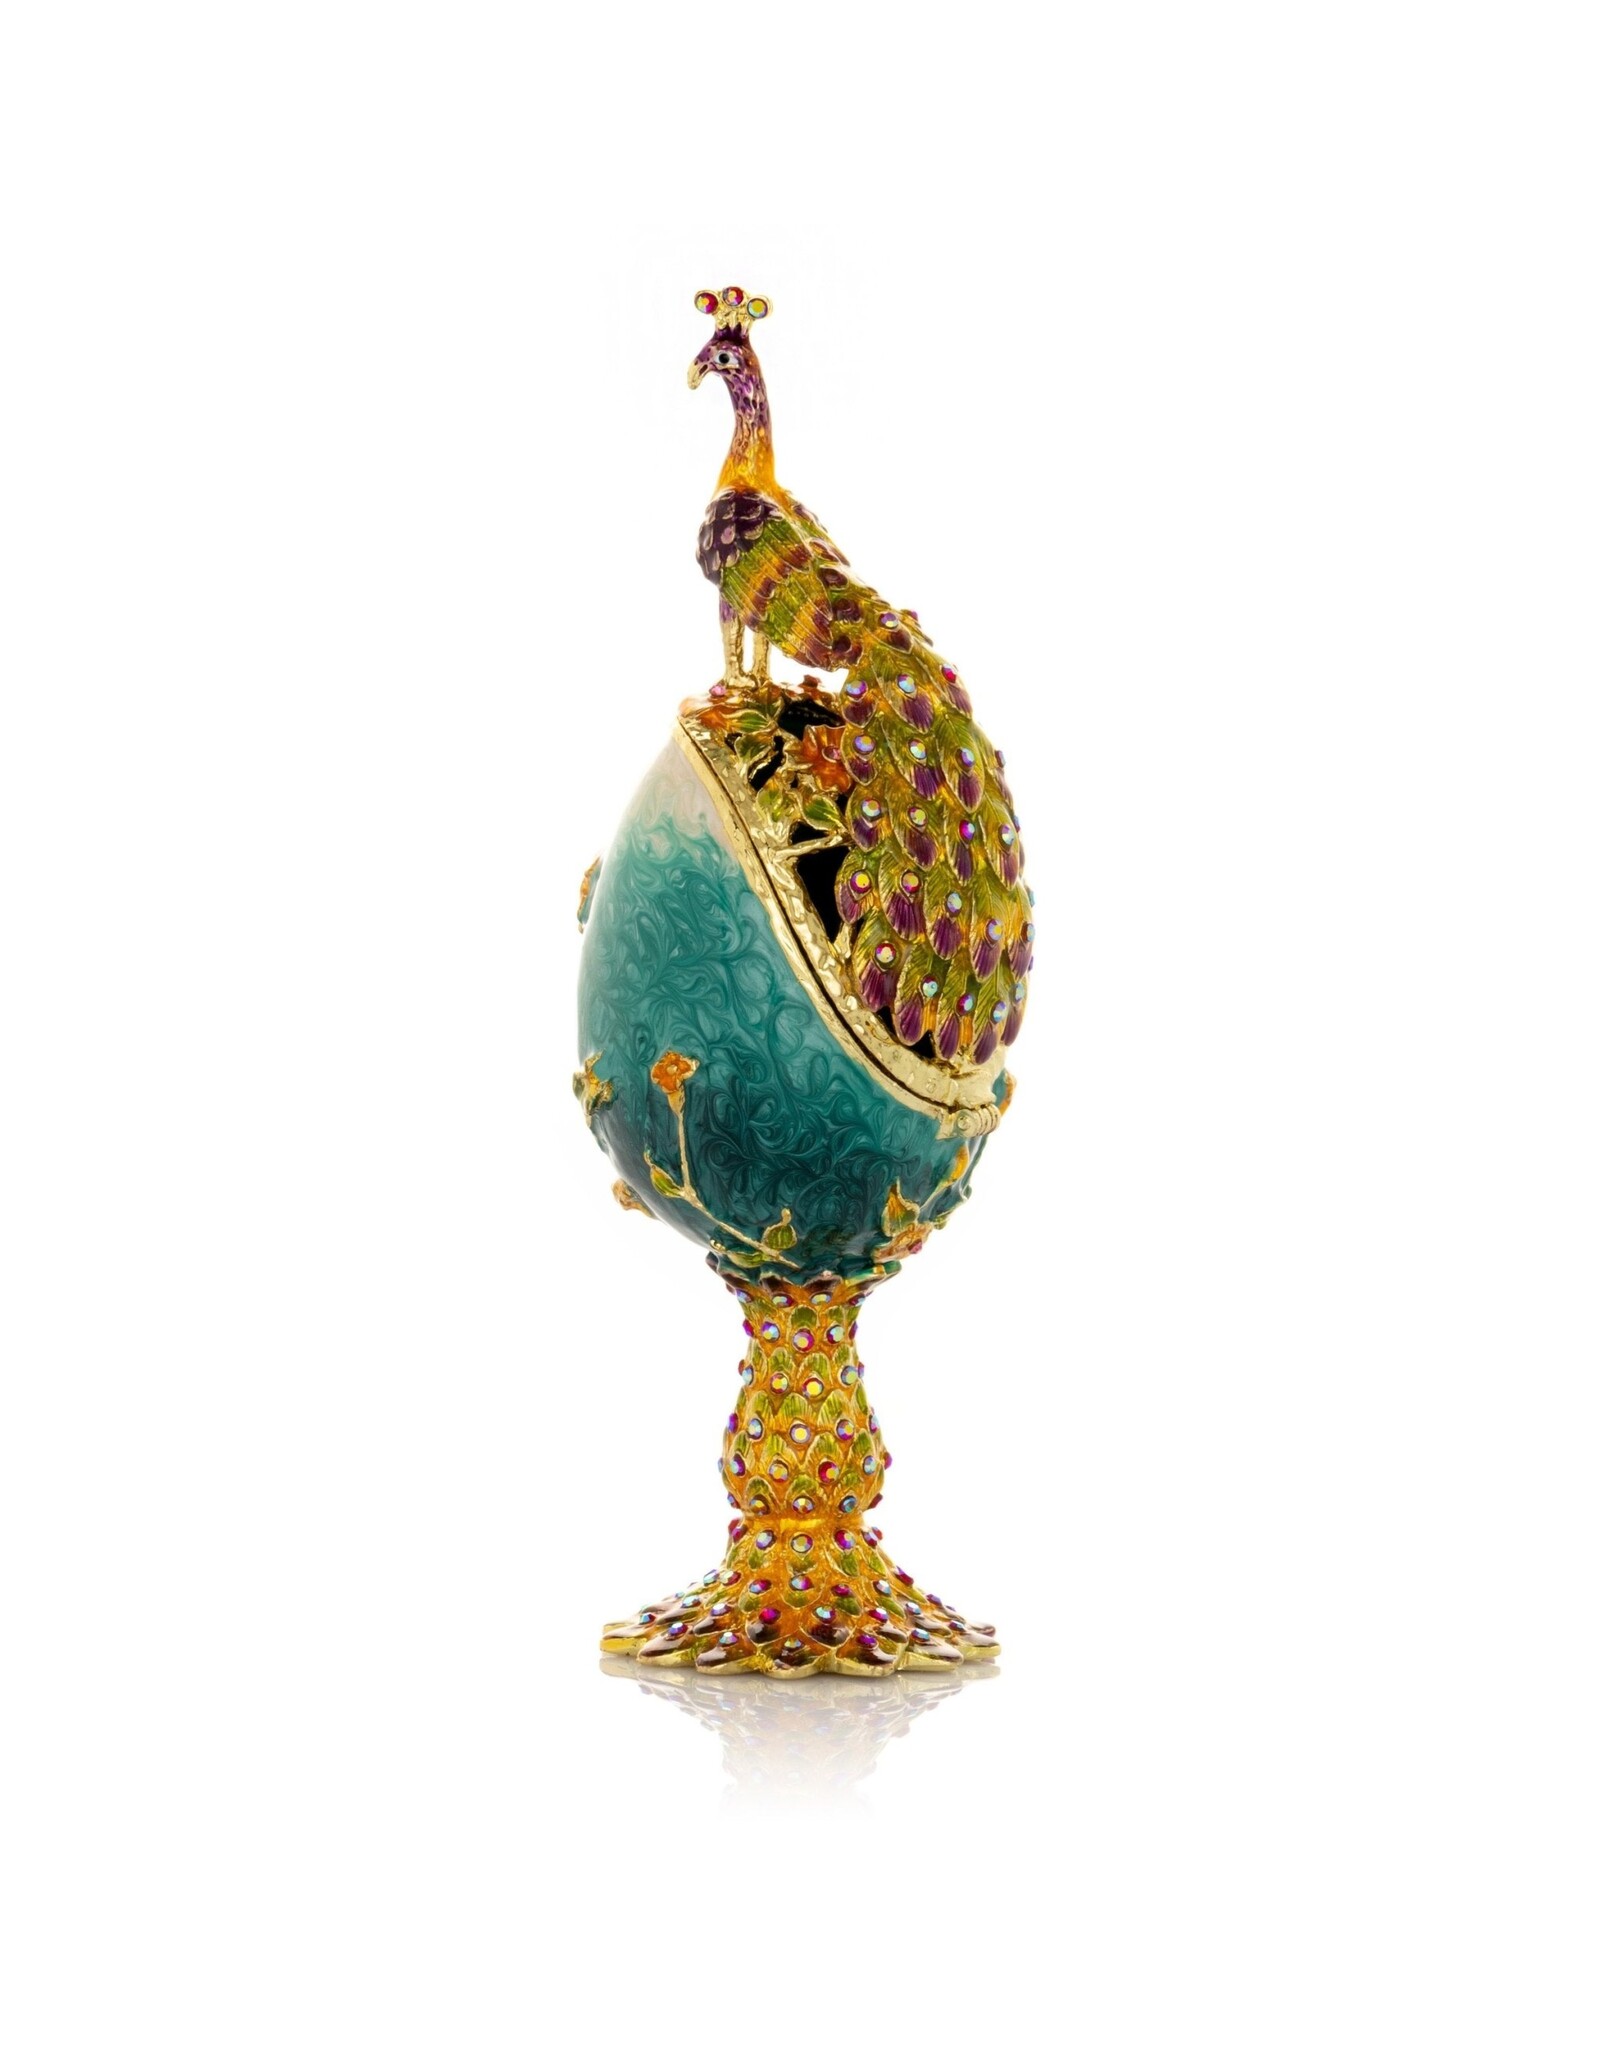 Faberge Inspired Peacock Imperial Egg